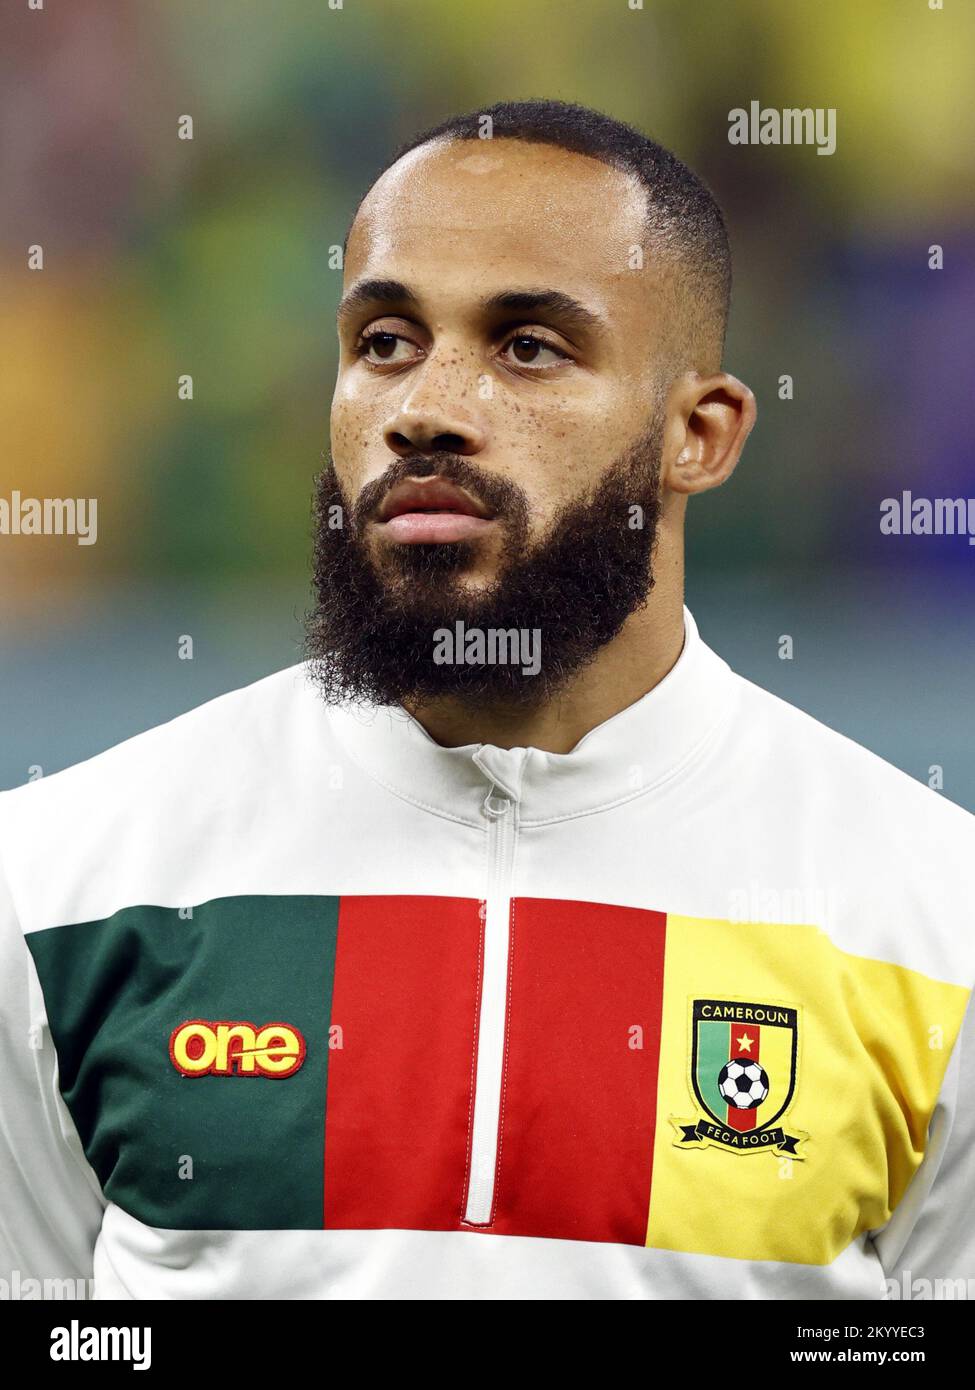 Qatar. 02nd Dec, 2022. LUSAIL CITY - Bryan Mbeumo of Cameroon during the FIFA World Cup Qatar 2022 group G match between Cameroon and Brazil at Lusail Stadium on December 2, 2022 in Lusail City, Qatar. AP | Dutch Height | MAURICE OF STONE Credit: ANP/Alamy Live News Stock Photo